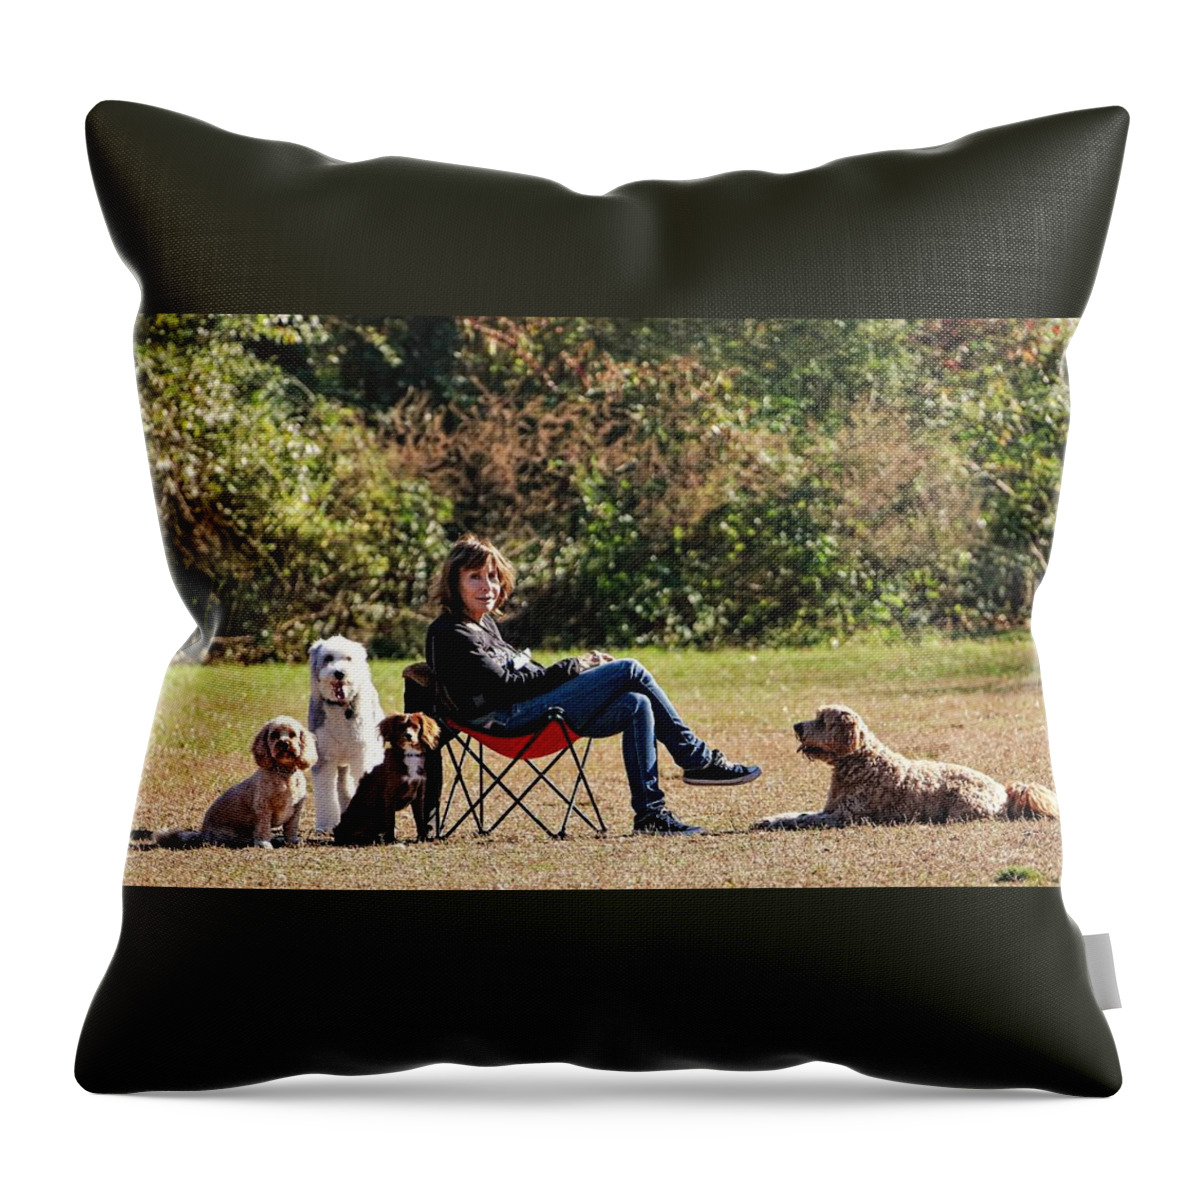 Dog Throw Pillow featuring the photograph In Training2 by John Linnemeyer